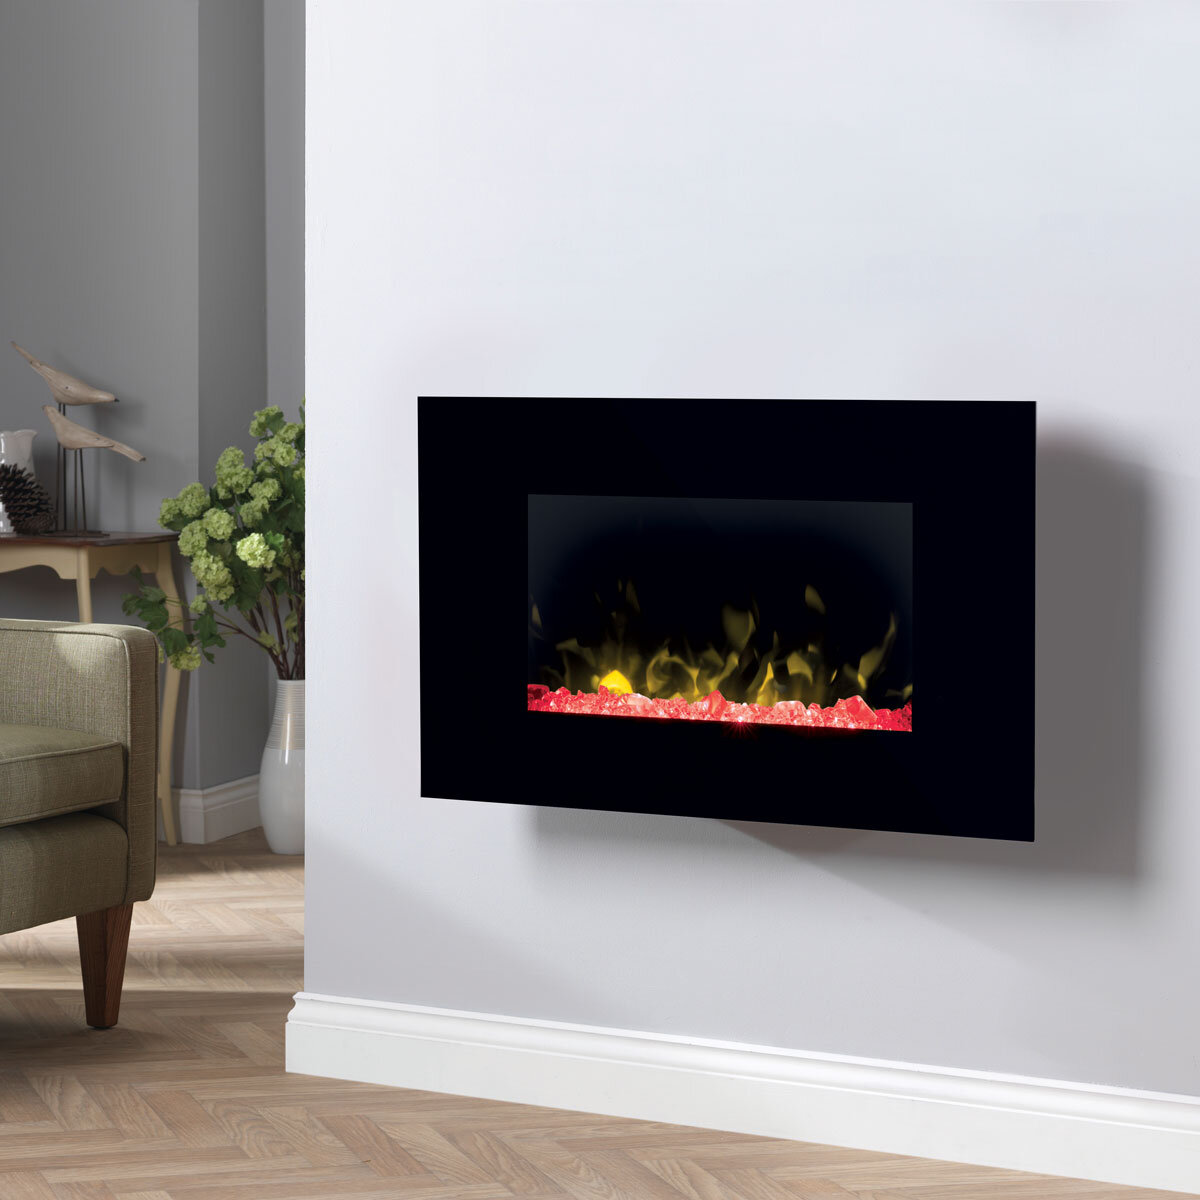 Dimplex ASTI Electric fireplace with mantel Optiflame